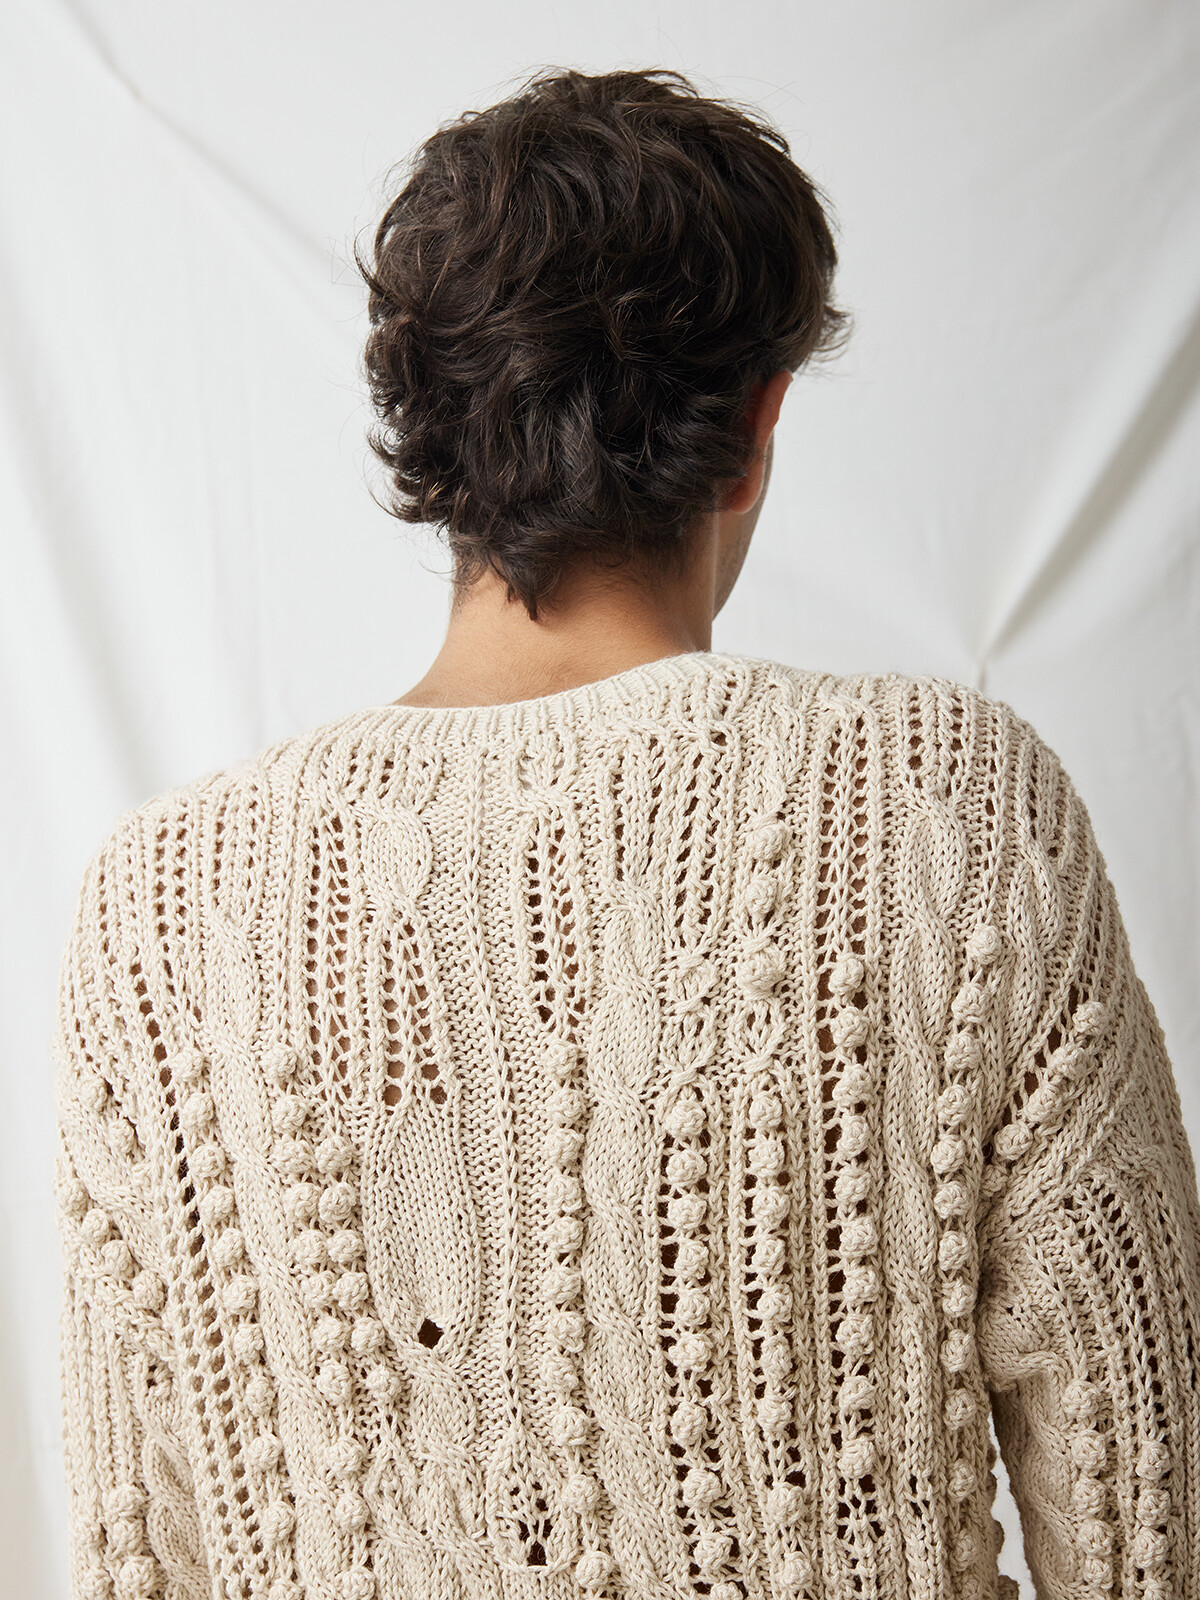 Knots & ropes sweater Image